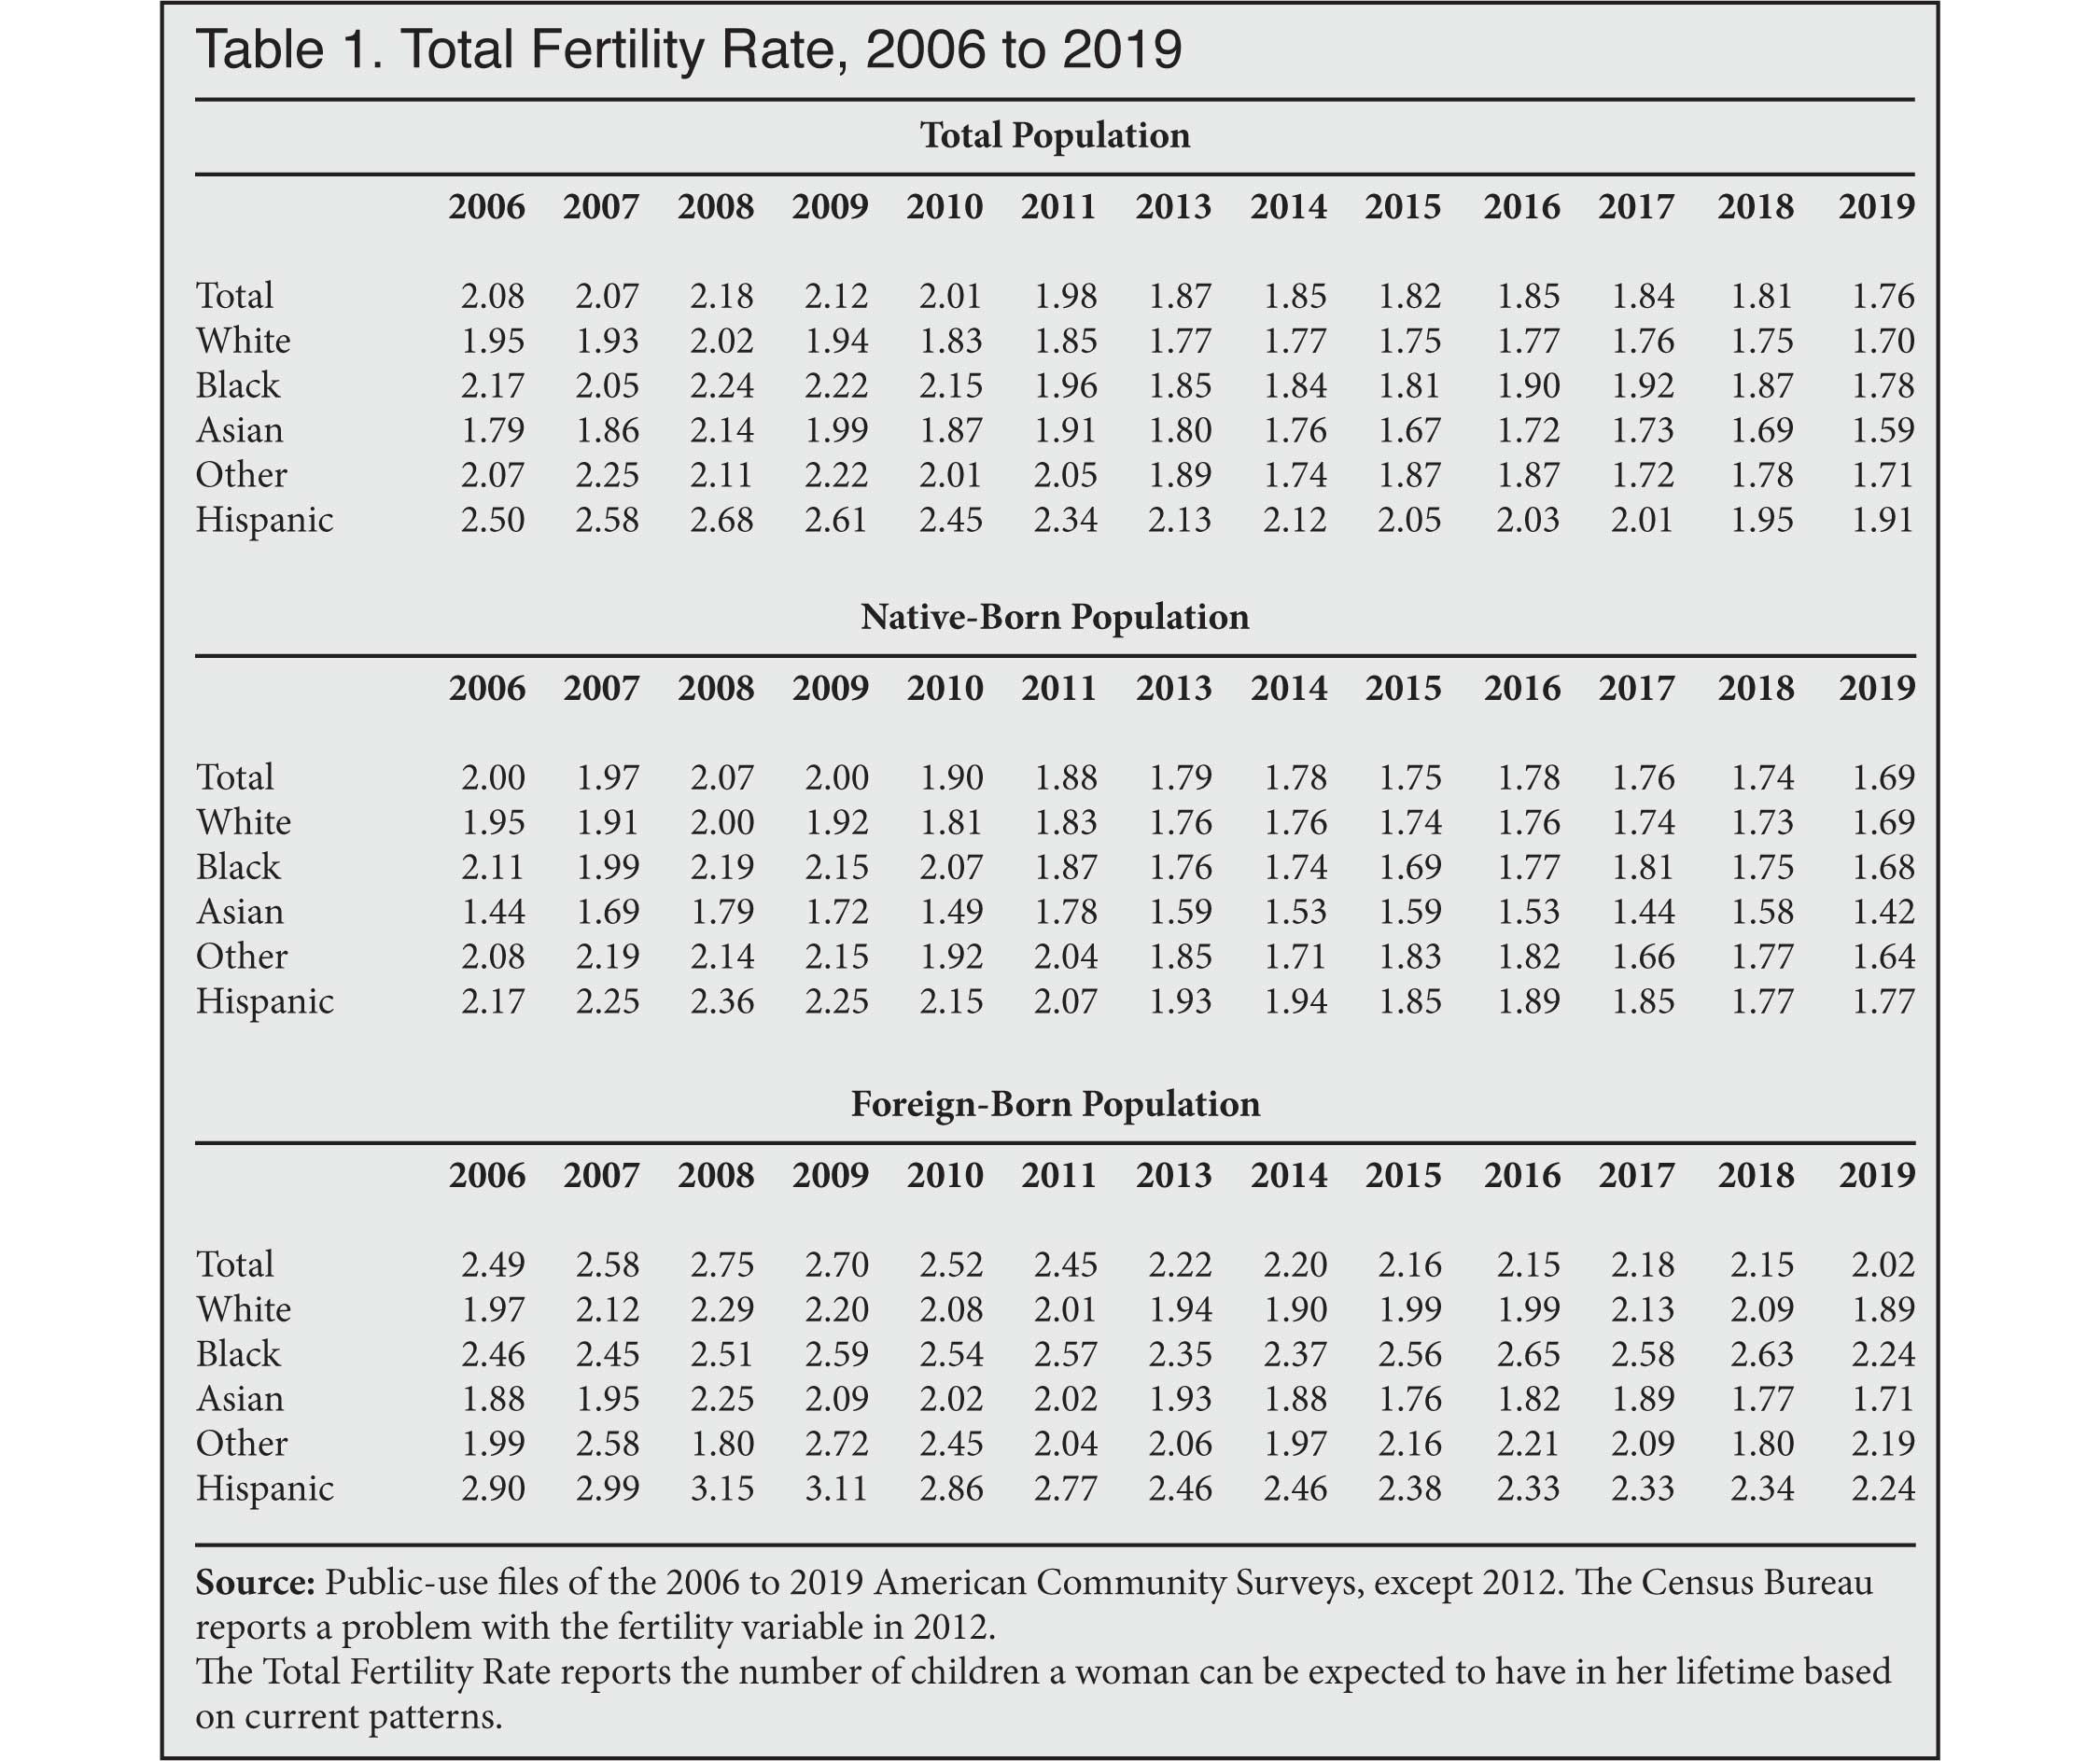 Table: Total Fertility Rate, 2006 to 2019